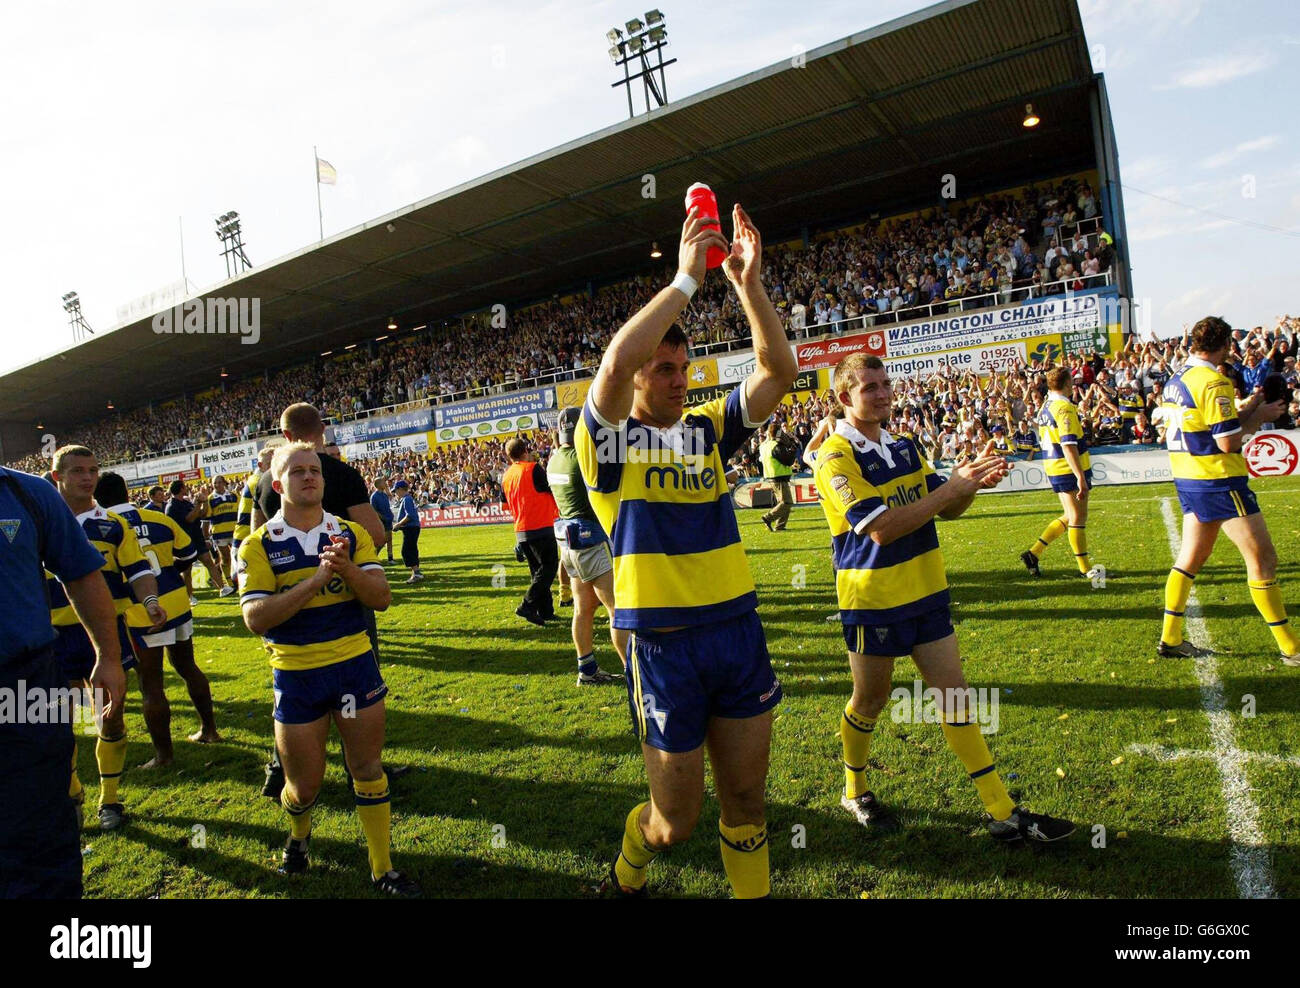 Warrington players celebrate after defeating Wakefield in their Tetley's Super League match at Wilderspool, Warrington. Warrington played their final game Wilderspool stadium. Stock Photo